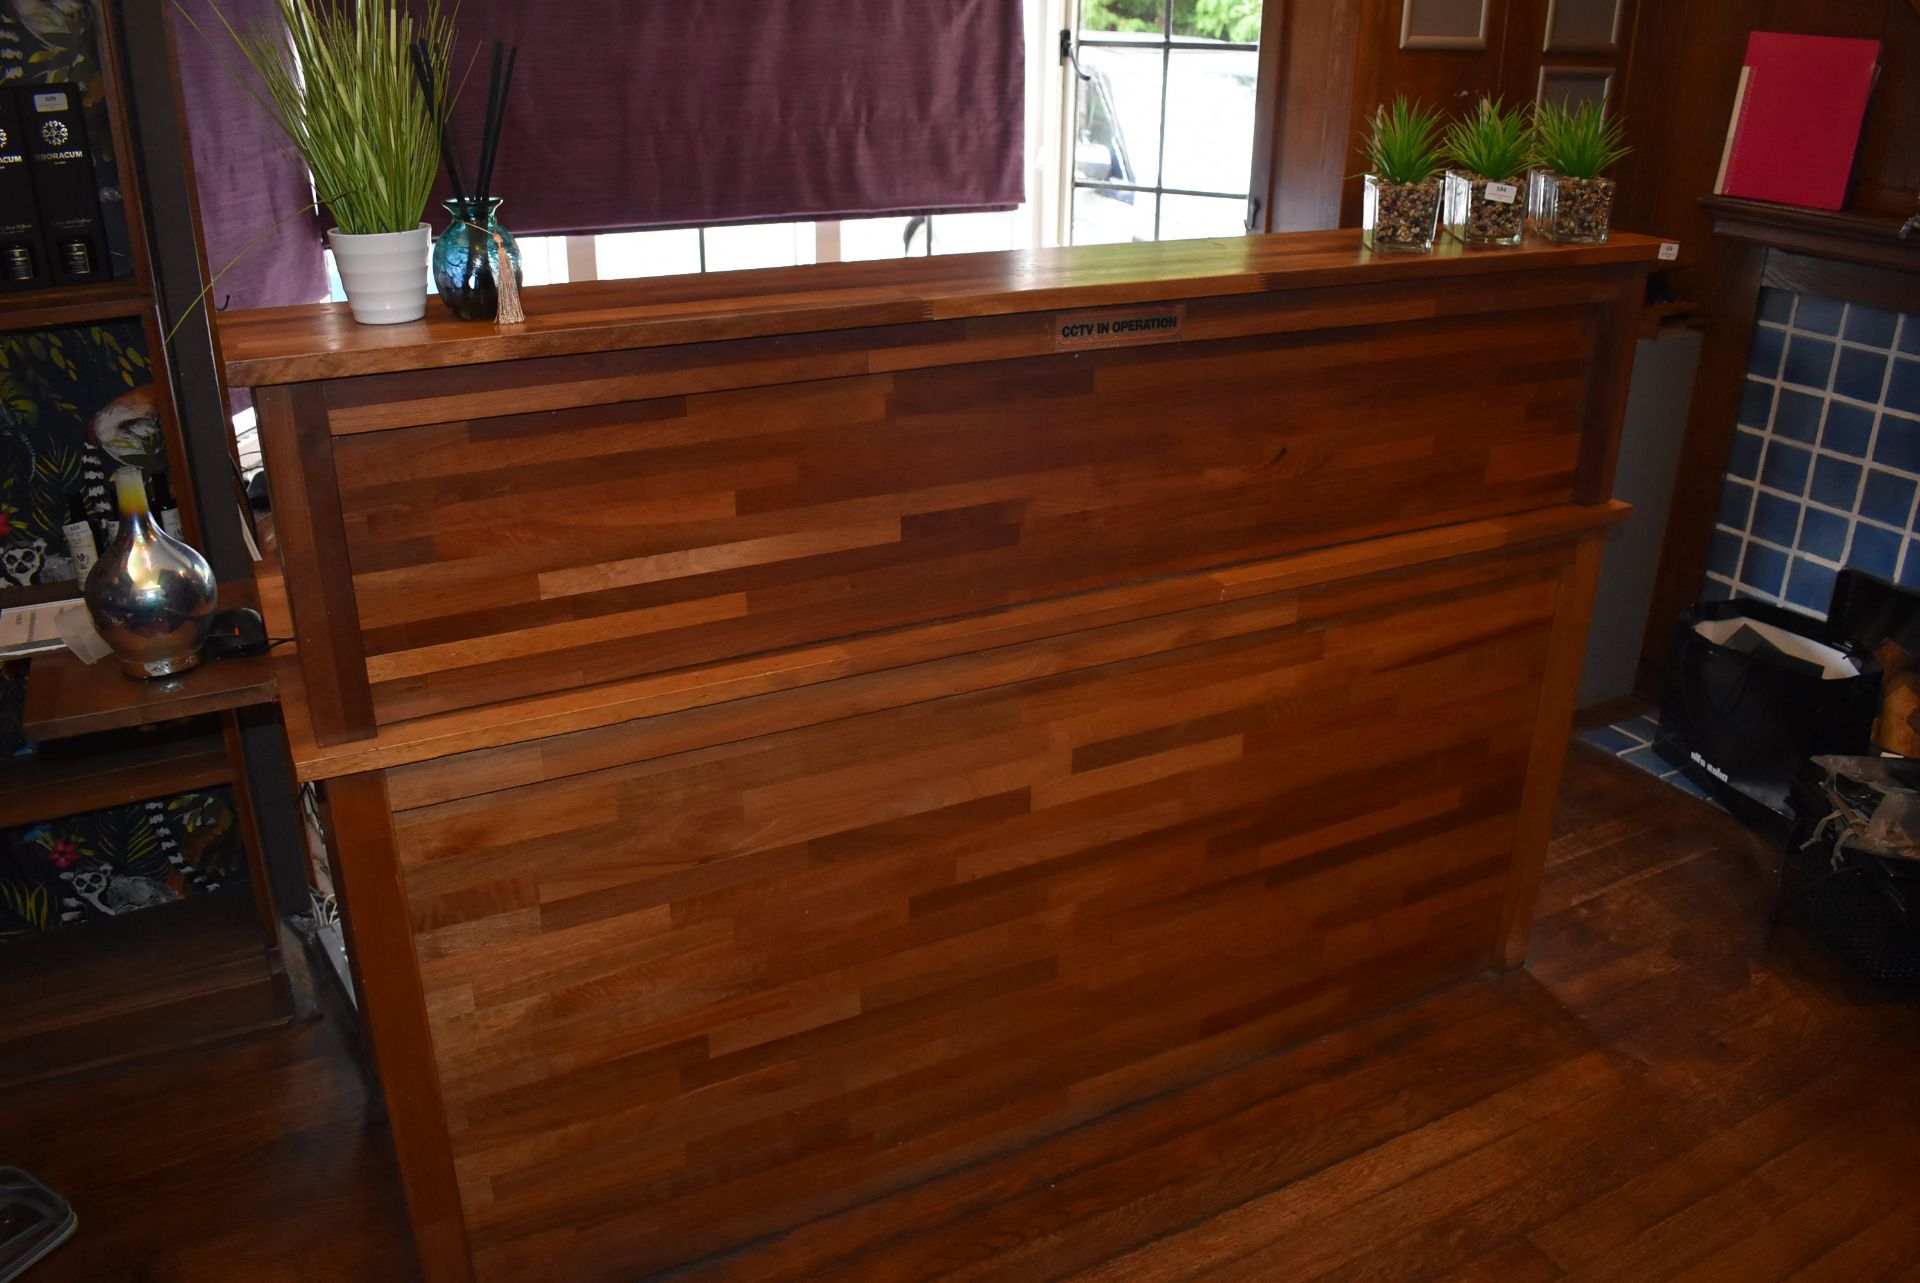 *Teak Reception Desk ~180x60cm with Integral Knee Hole, Storage, and Shelving